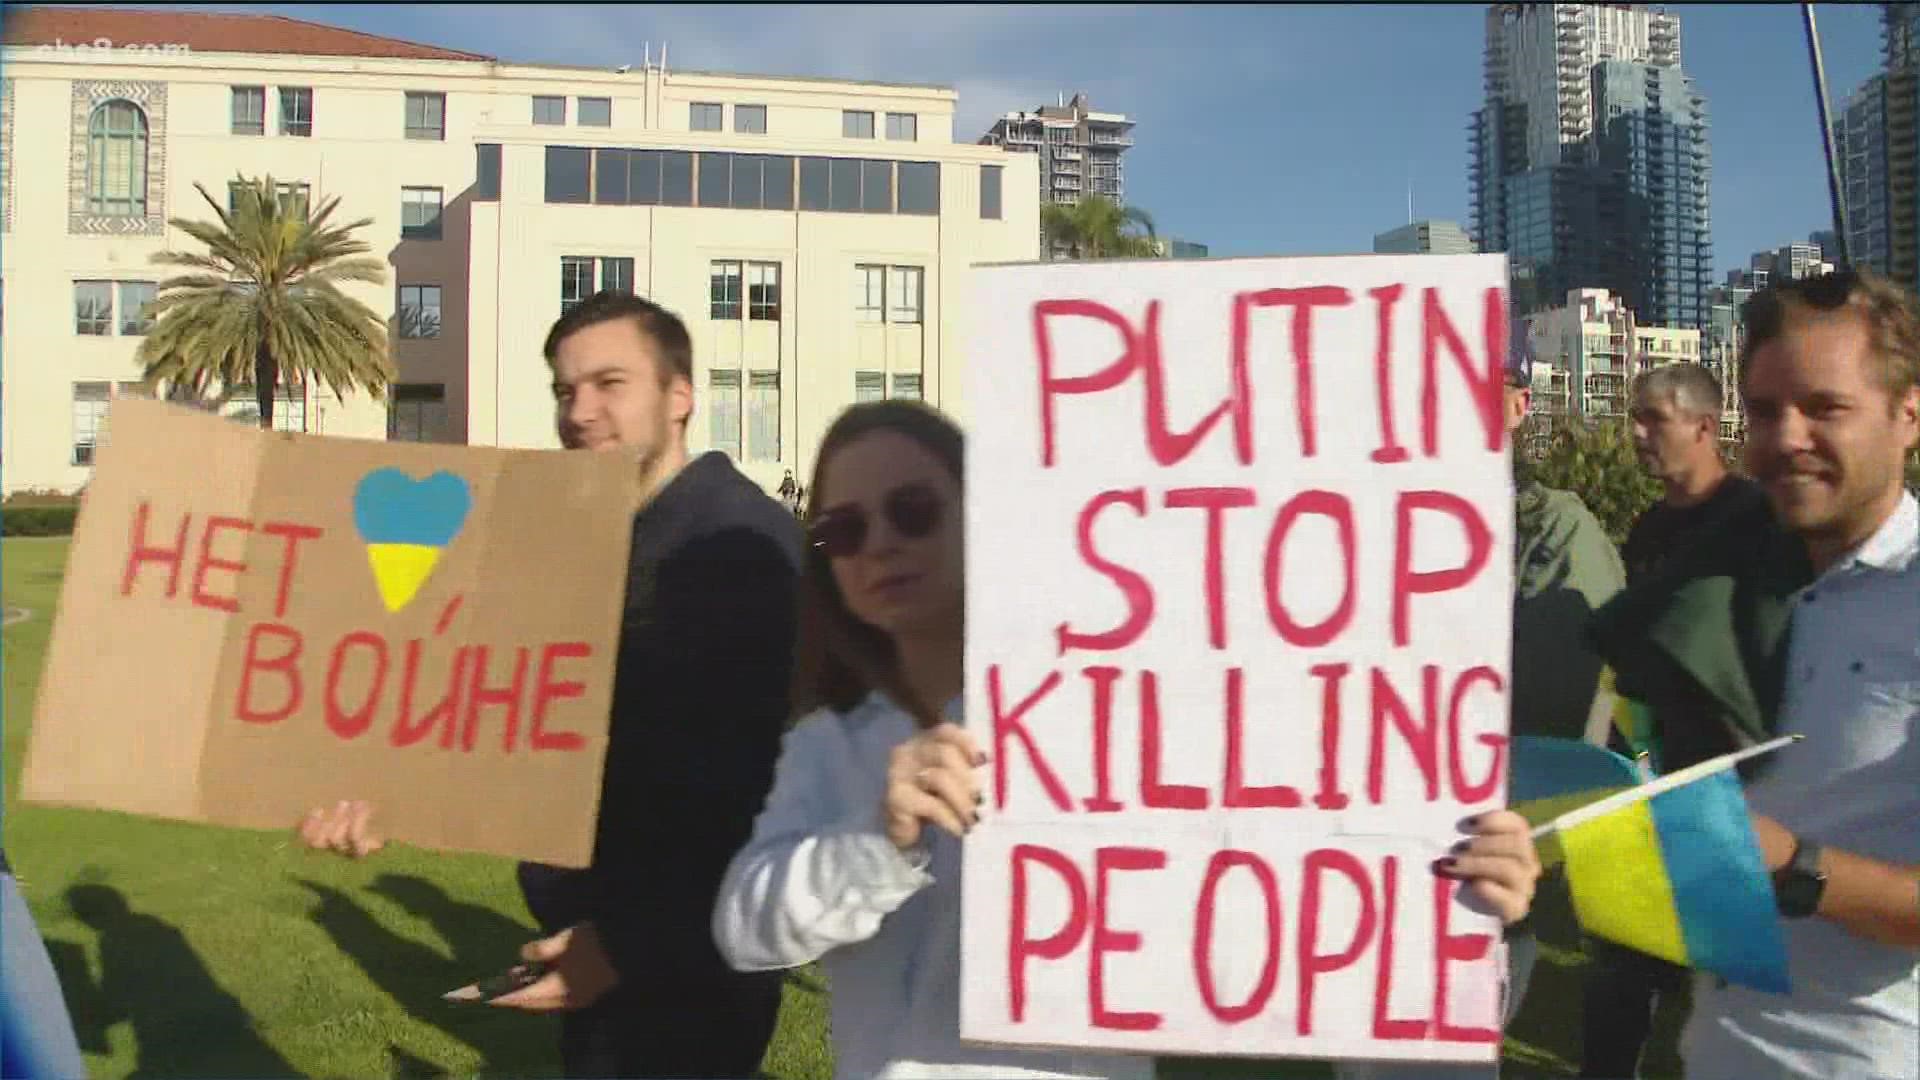 San Diegans with ties to Ukraine gathered across the county protesting for peace, as the fighting and bloodshed intensifies.